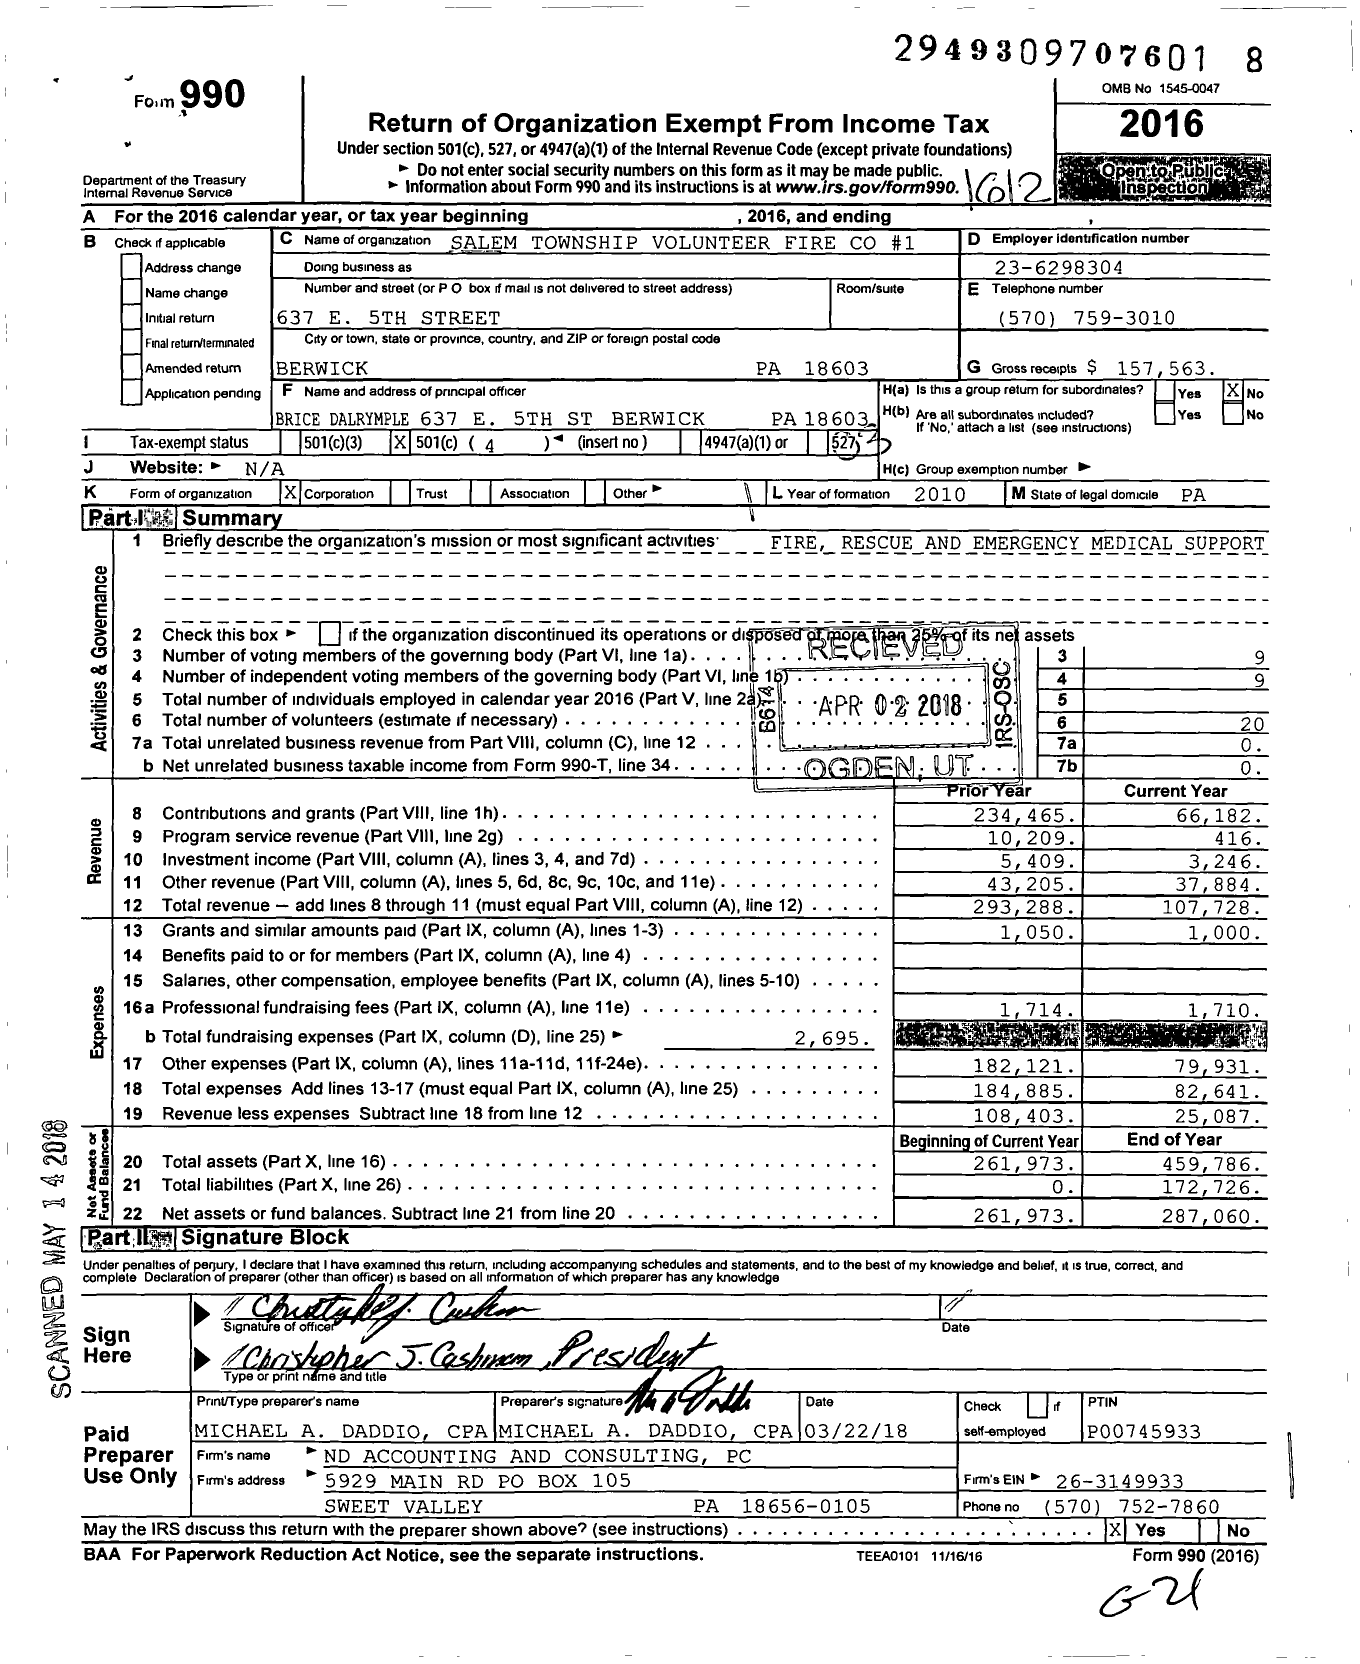 Image of first page of 2016 Form 990 for Salem Township Volunteer Fire #1